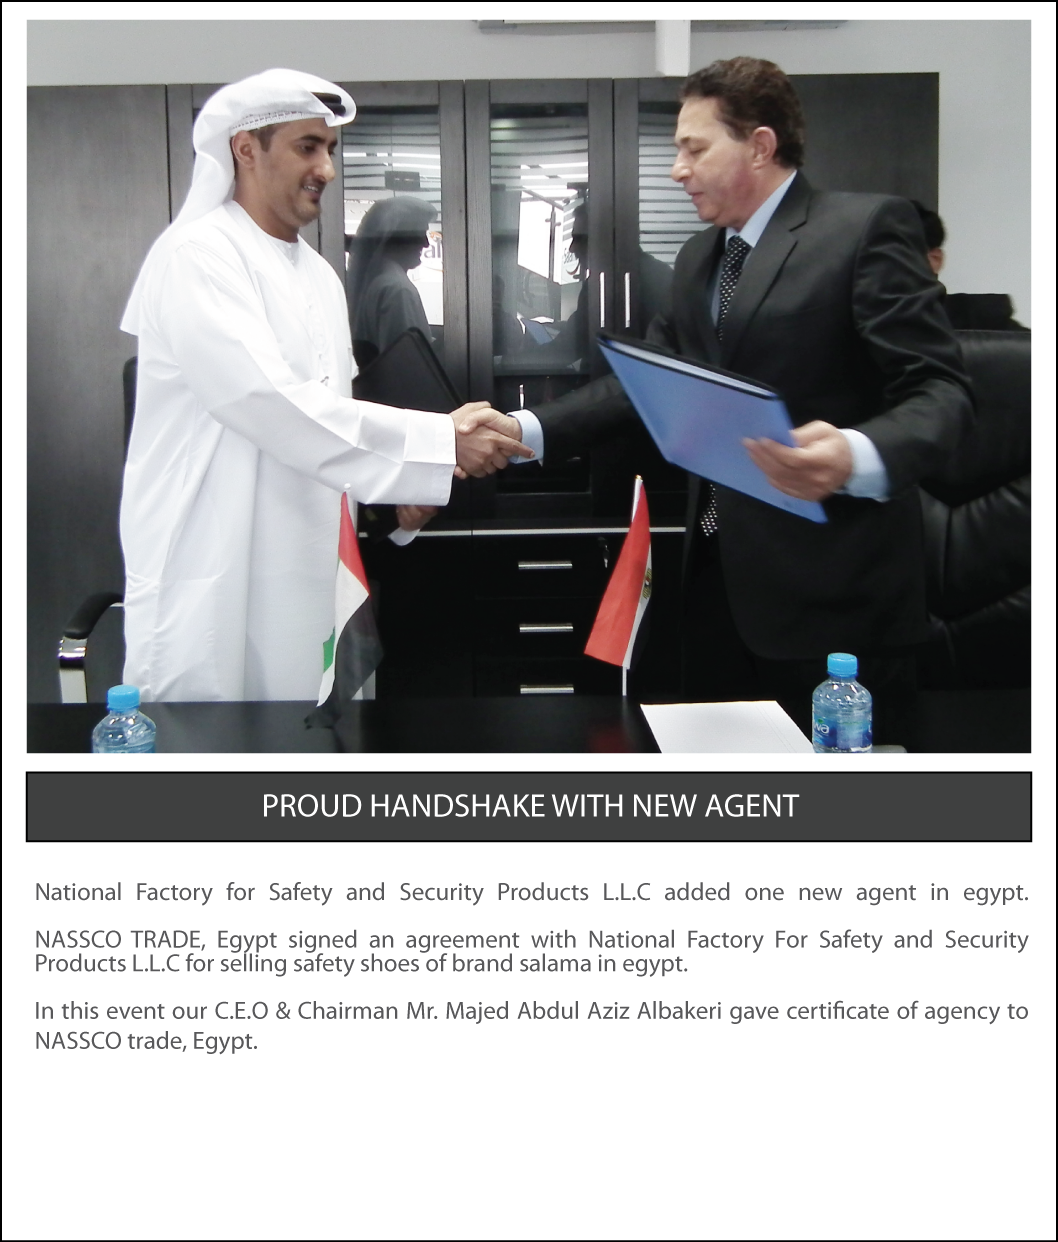 Signed an agreement with NASSCO TRADE, Egypt 